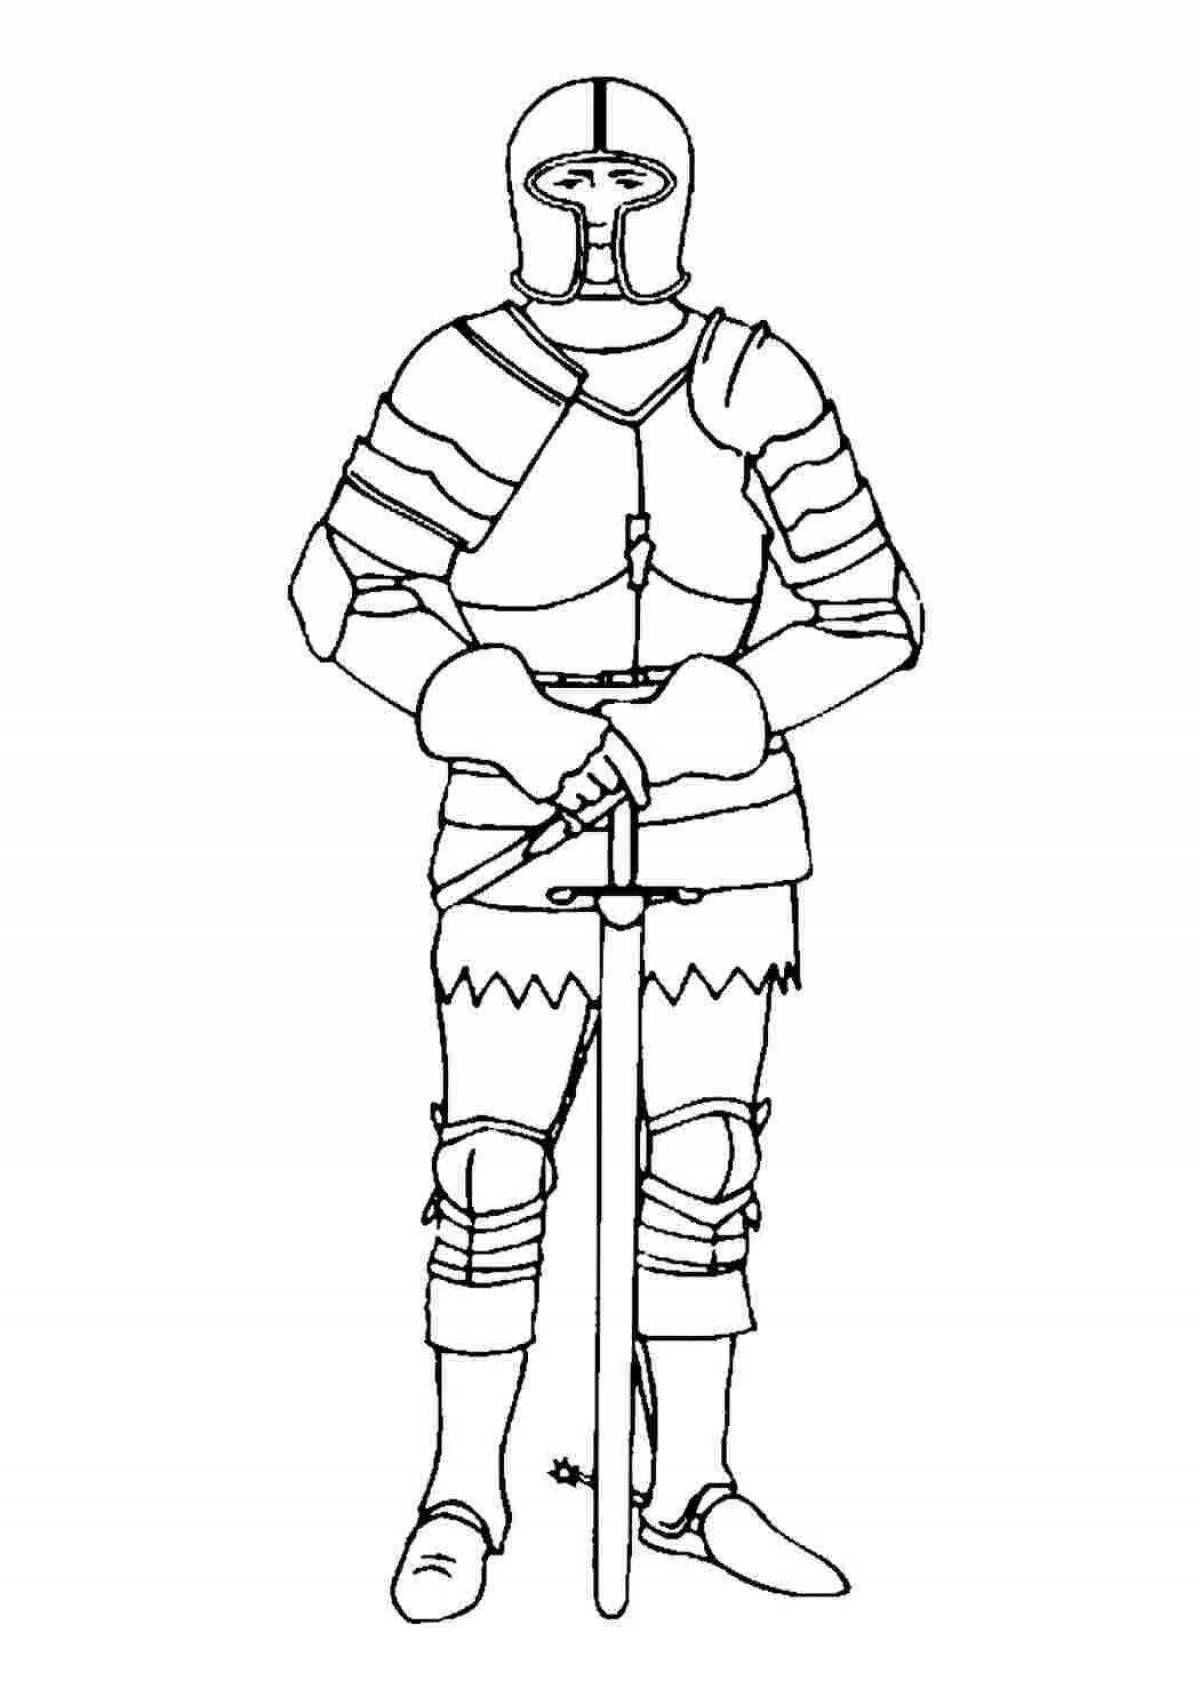 Great golden man coloring page